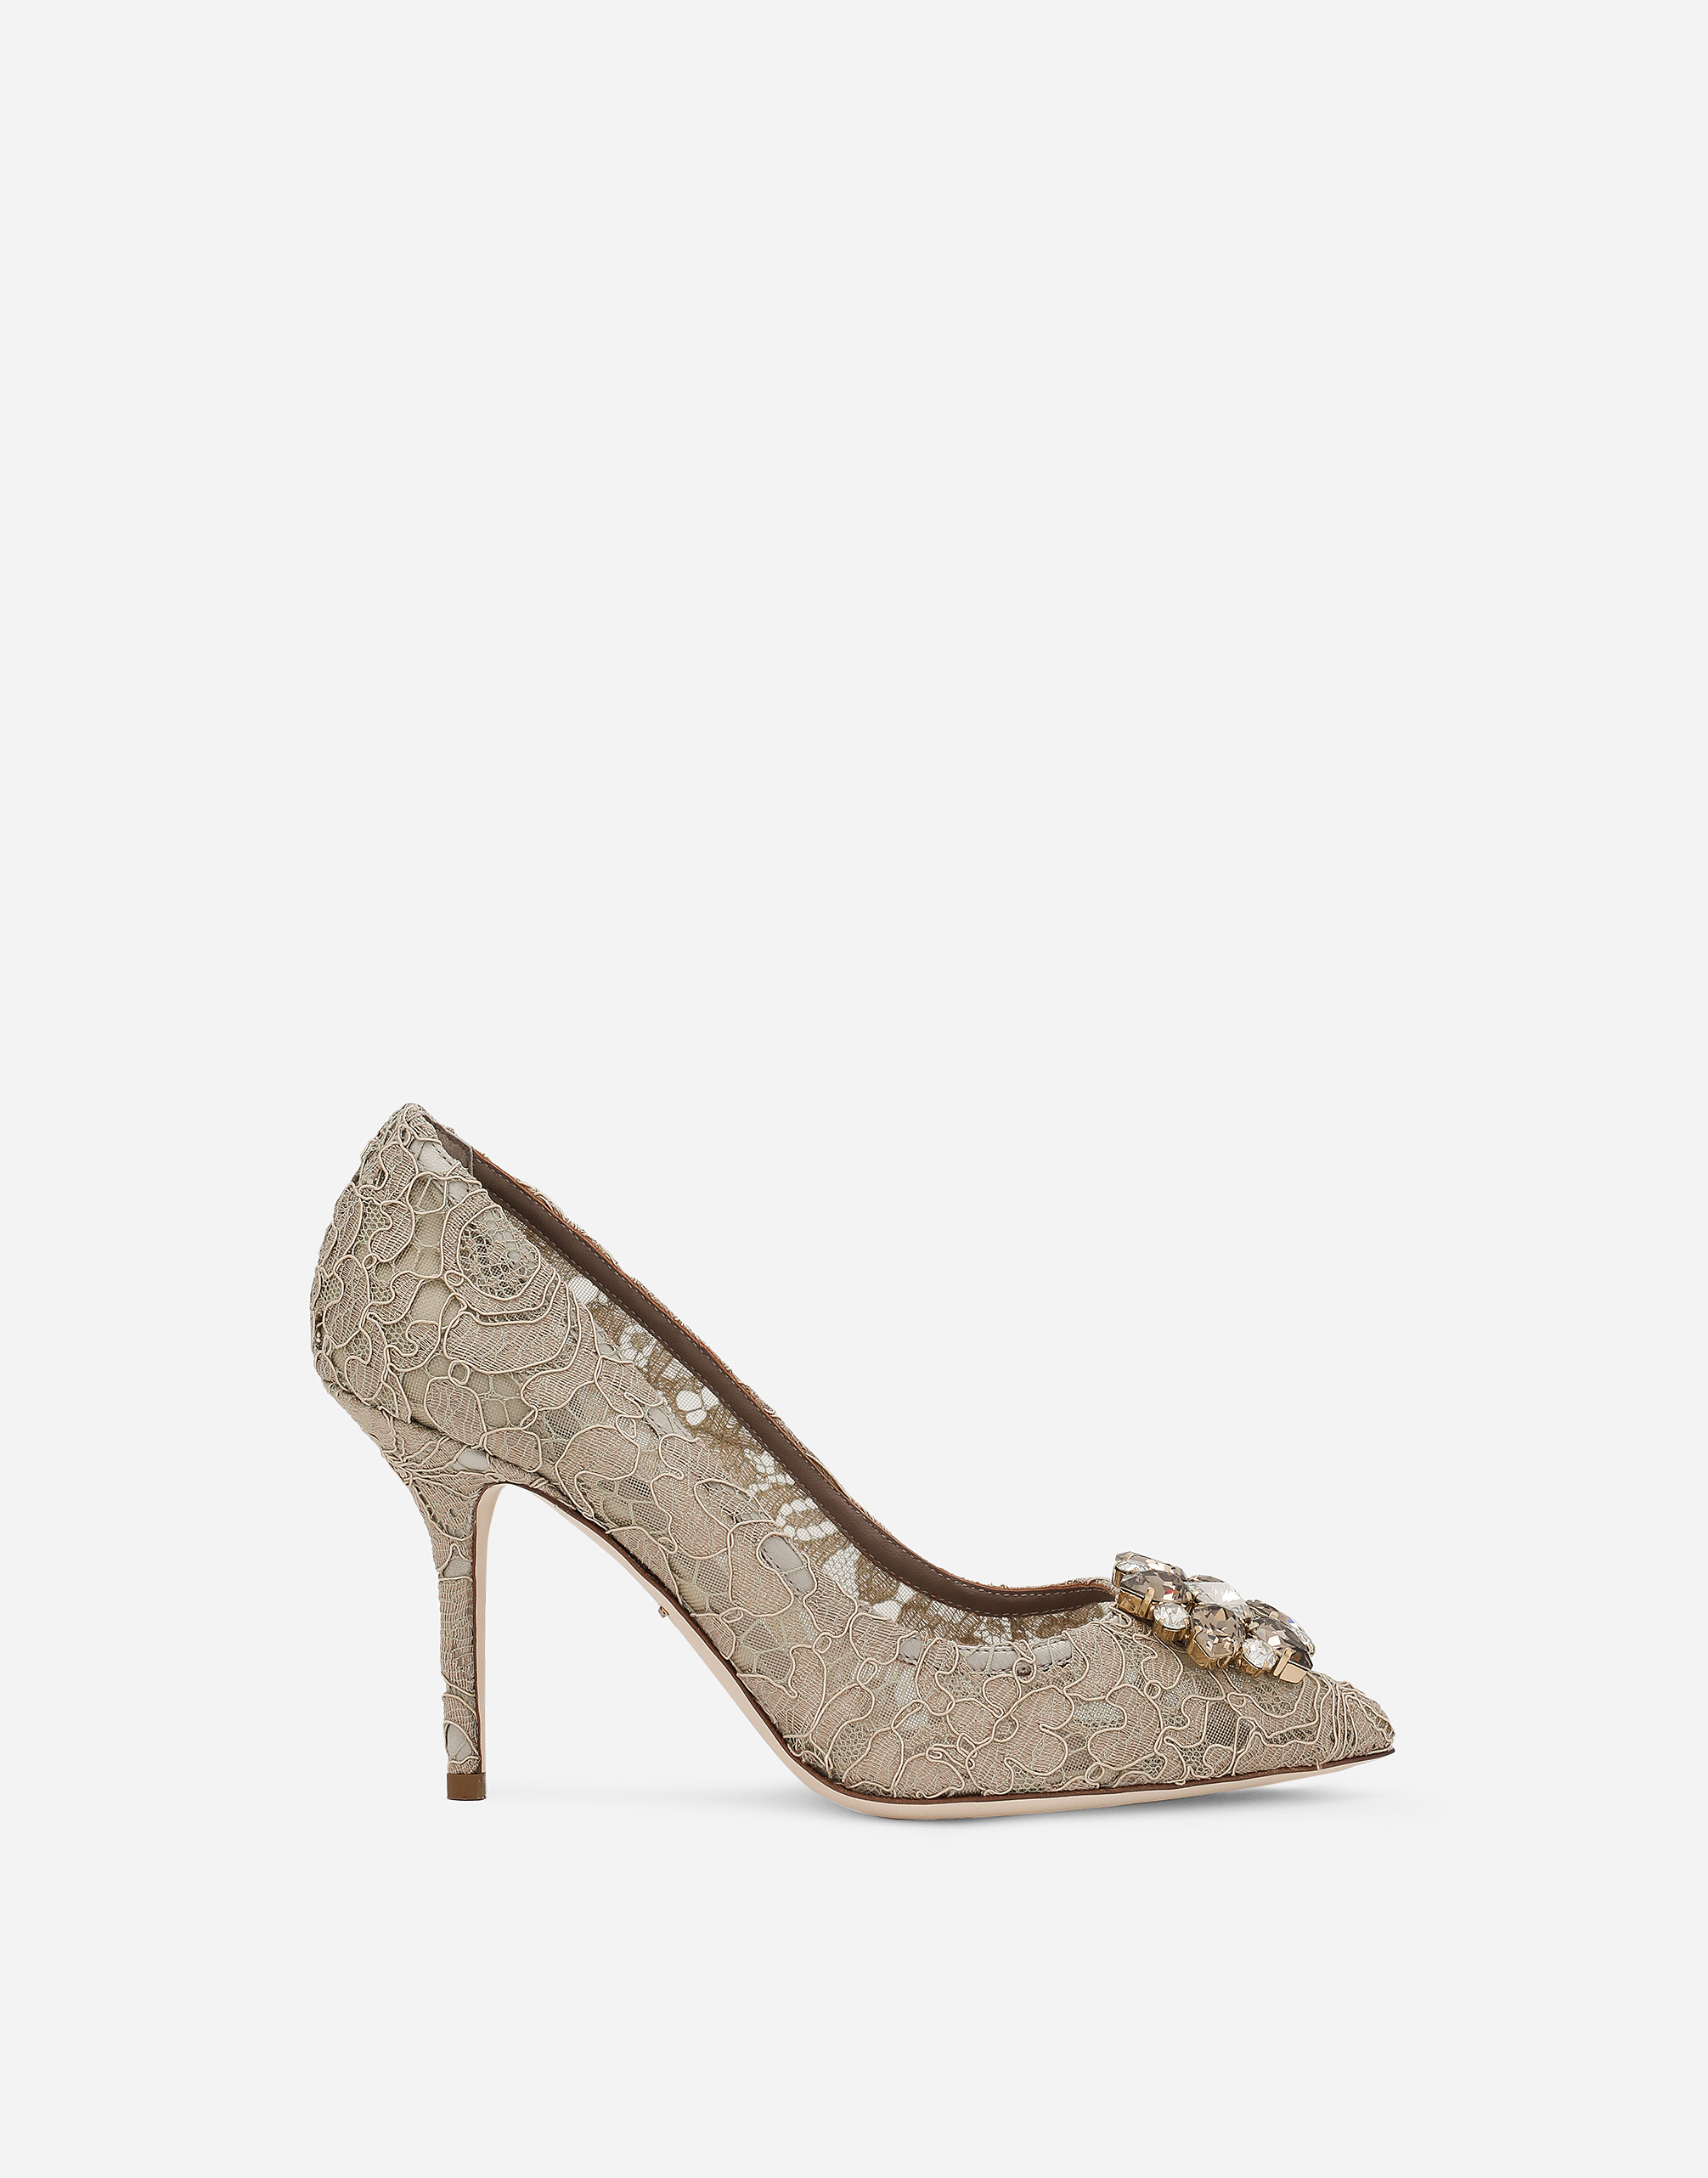 Lace rainbow pumps with brooch detailing in Beige